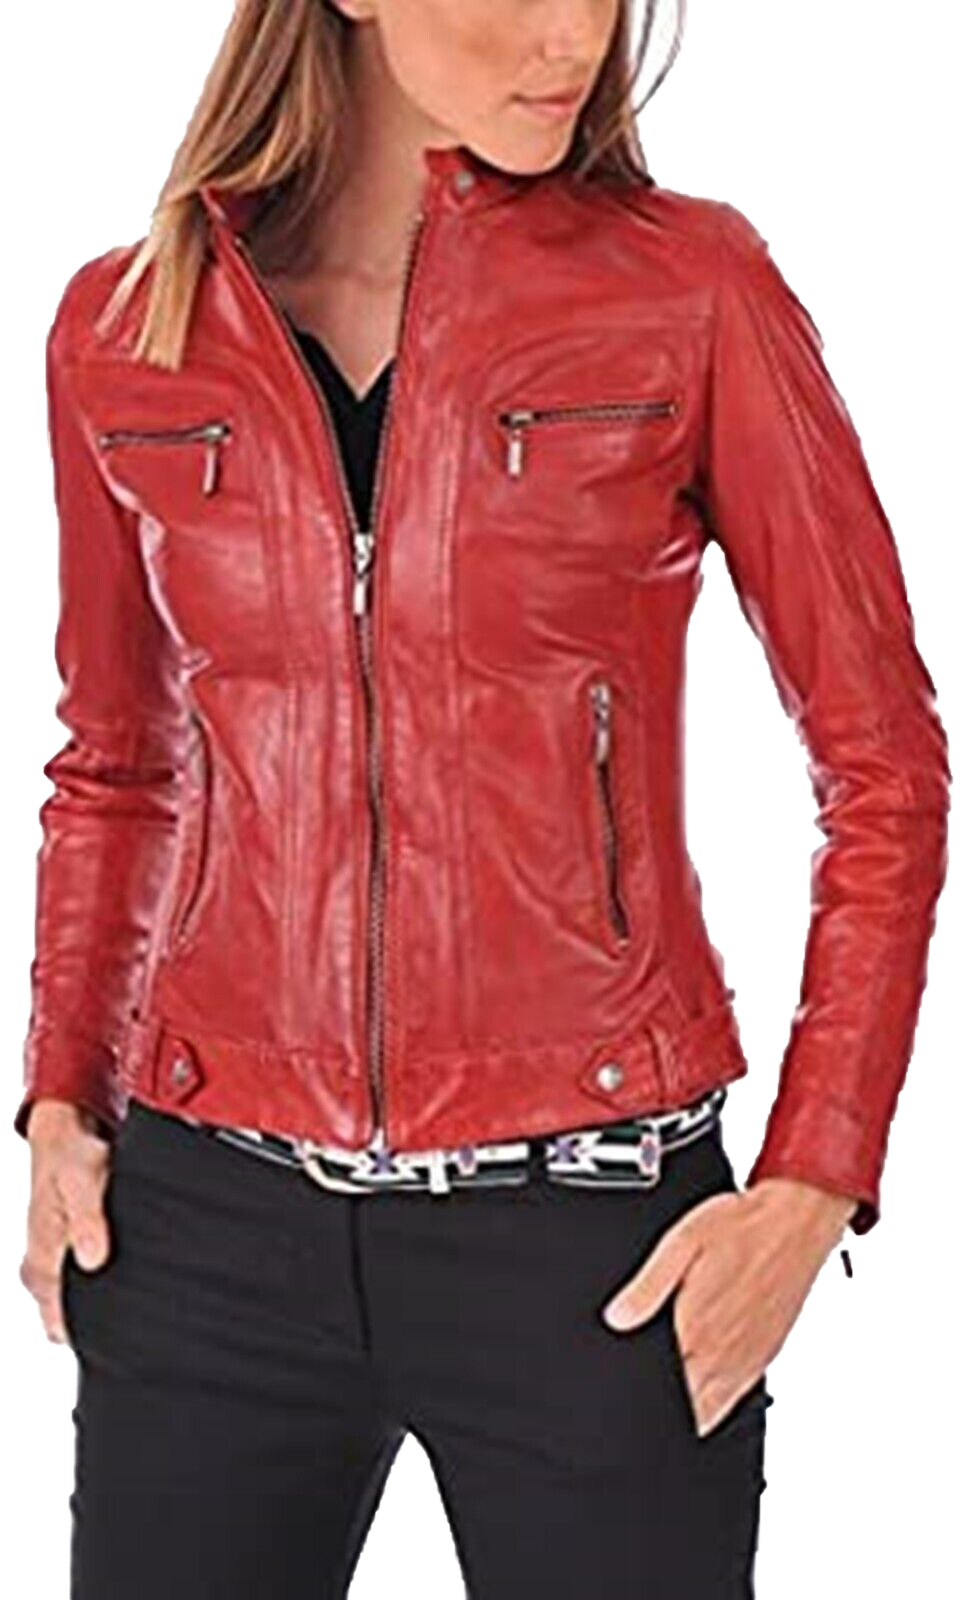 Womens Leather Jackets Motorcycle Bomber Biker Real Leather Jacket | Women Real Leather Jacket - Button Stitched